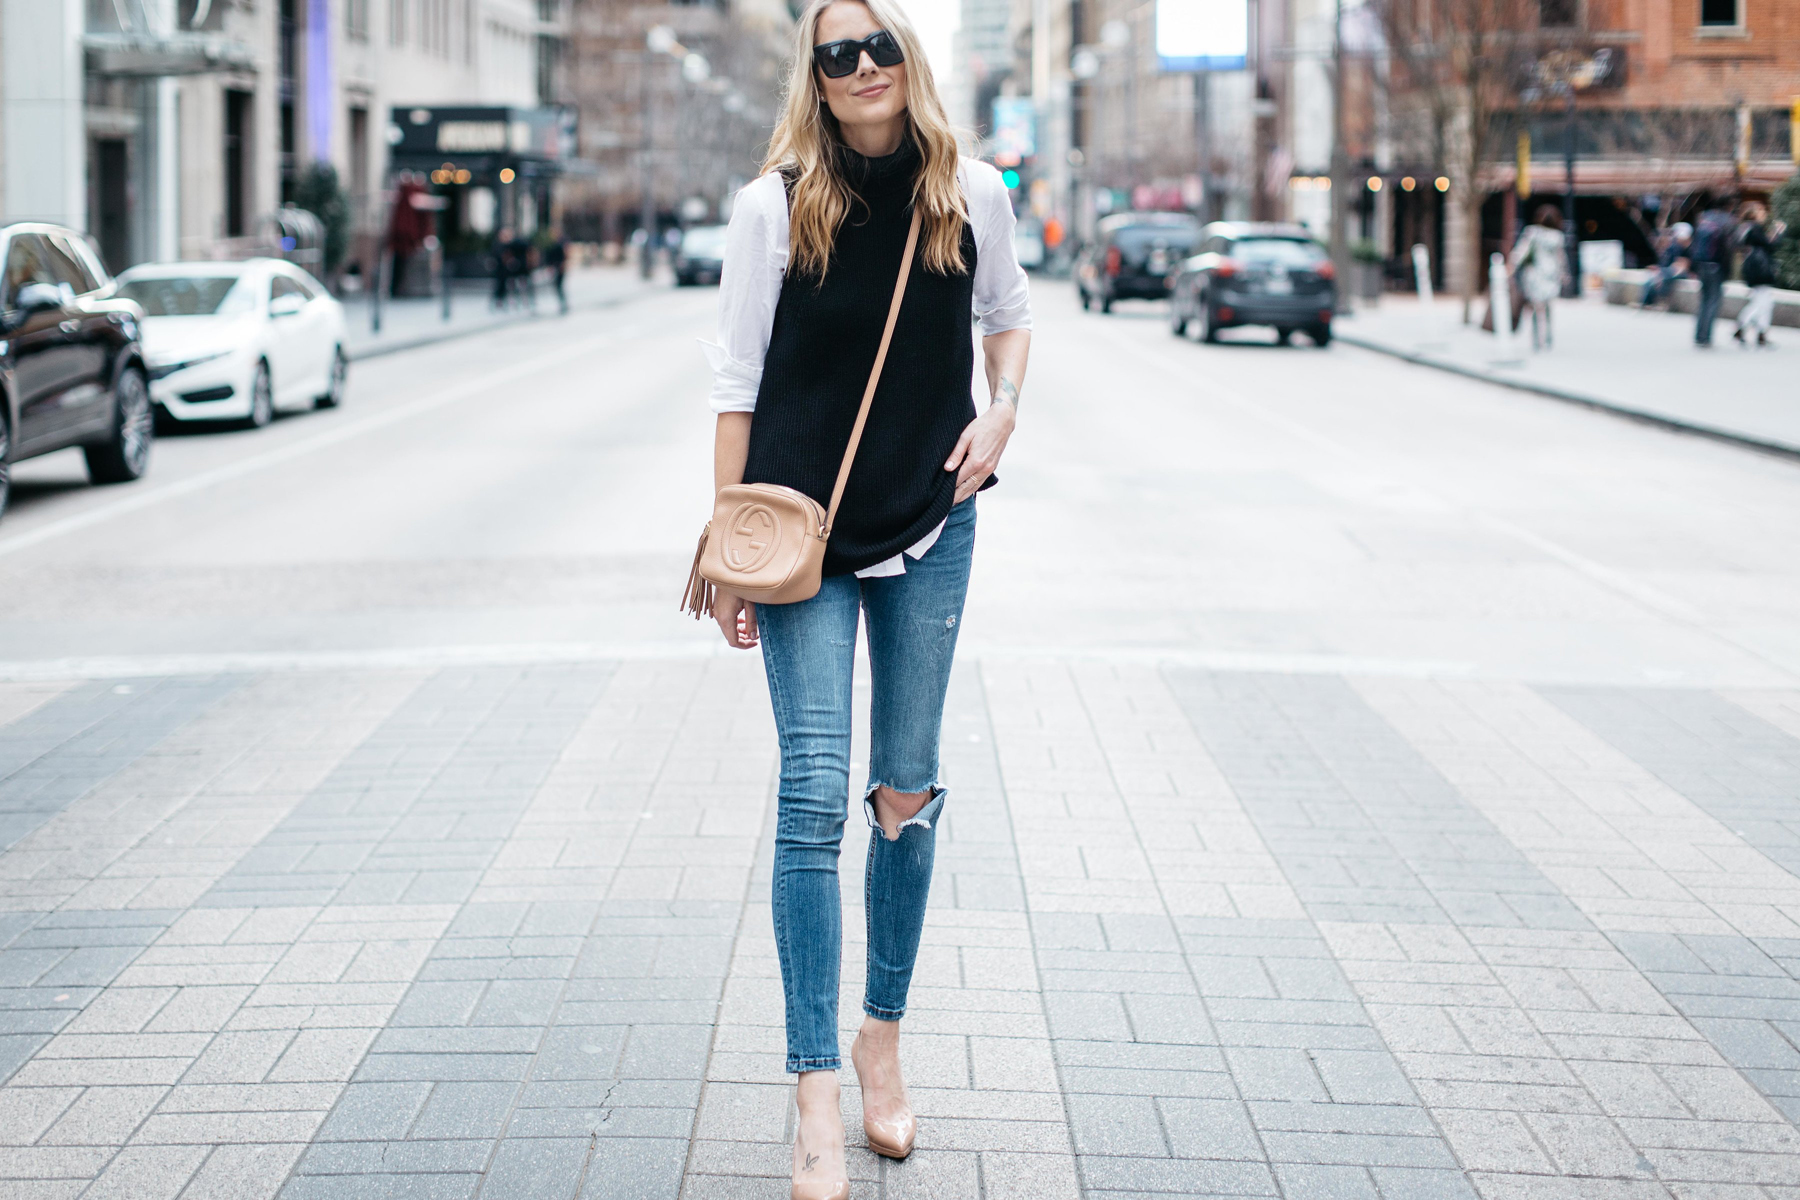 Fall Outfit, Winter Outfit, White Button Down Shirt, Black Sleeveless Turtleneck Sweater, Denim Ripped Skinny Jeans, Gucci Soho Handbag, Nude Pumps